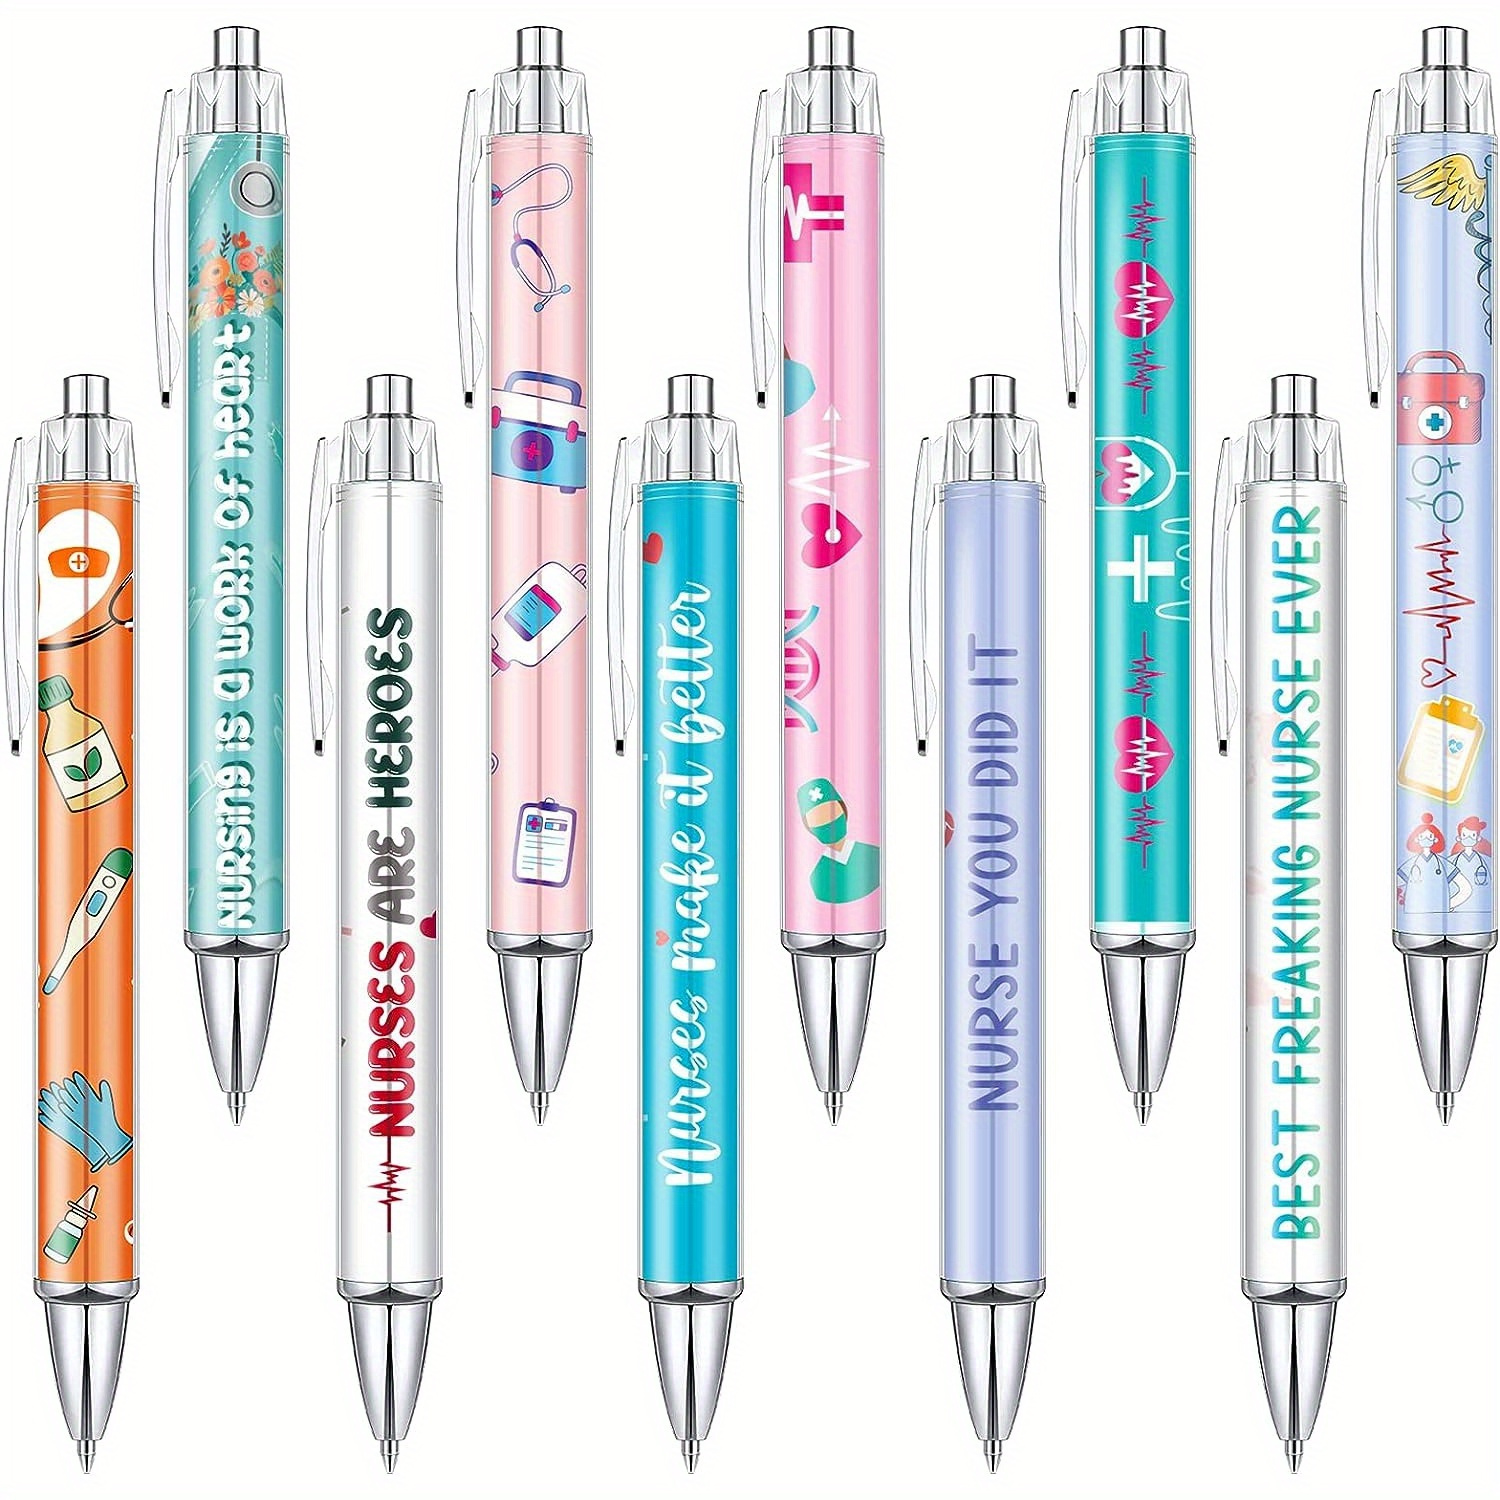 

10-pack Retractable Nursing Ballpoint Pens - Medium Point, Plastic Body, Appreciation Gift Set For Nurses, Staff & Students With Smooth Black Ink And Stylus Tip